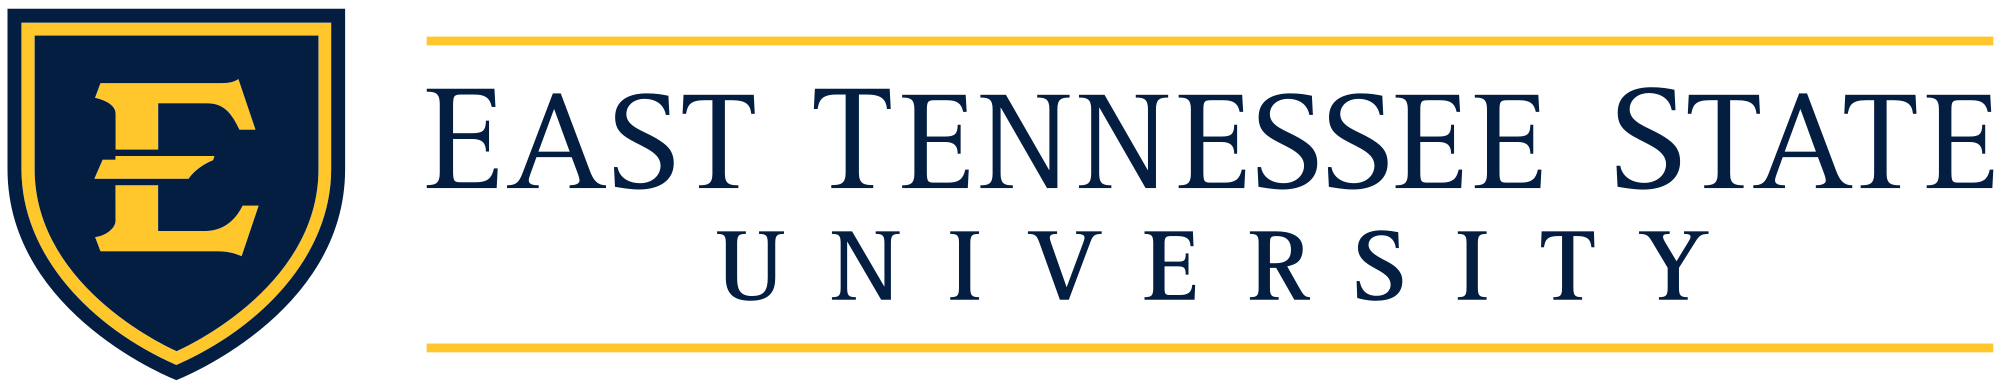 Tennessee State University Logo - File:East Tennessee State University logo.svg - Wikimedia Commons